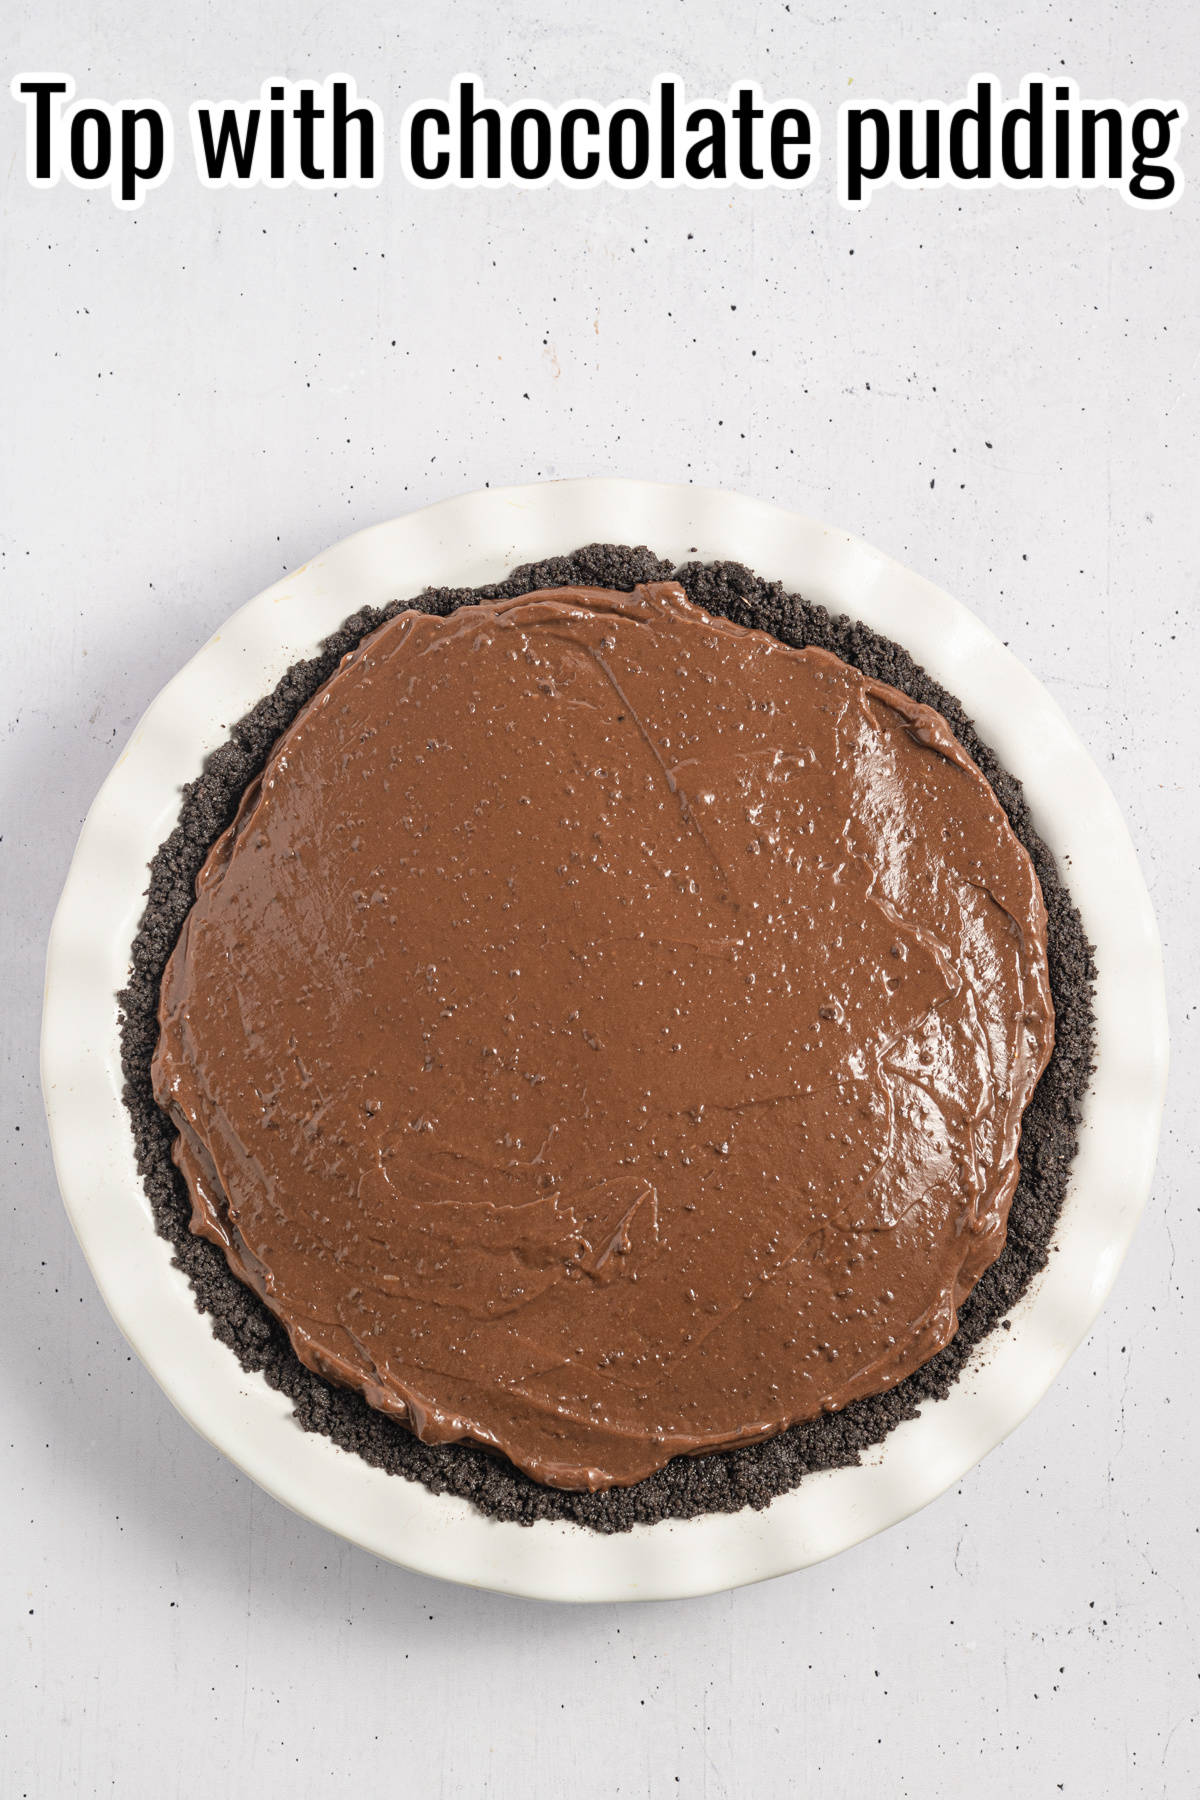 chocolate pudding in a chocolate pie.